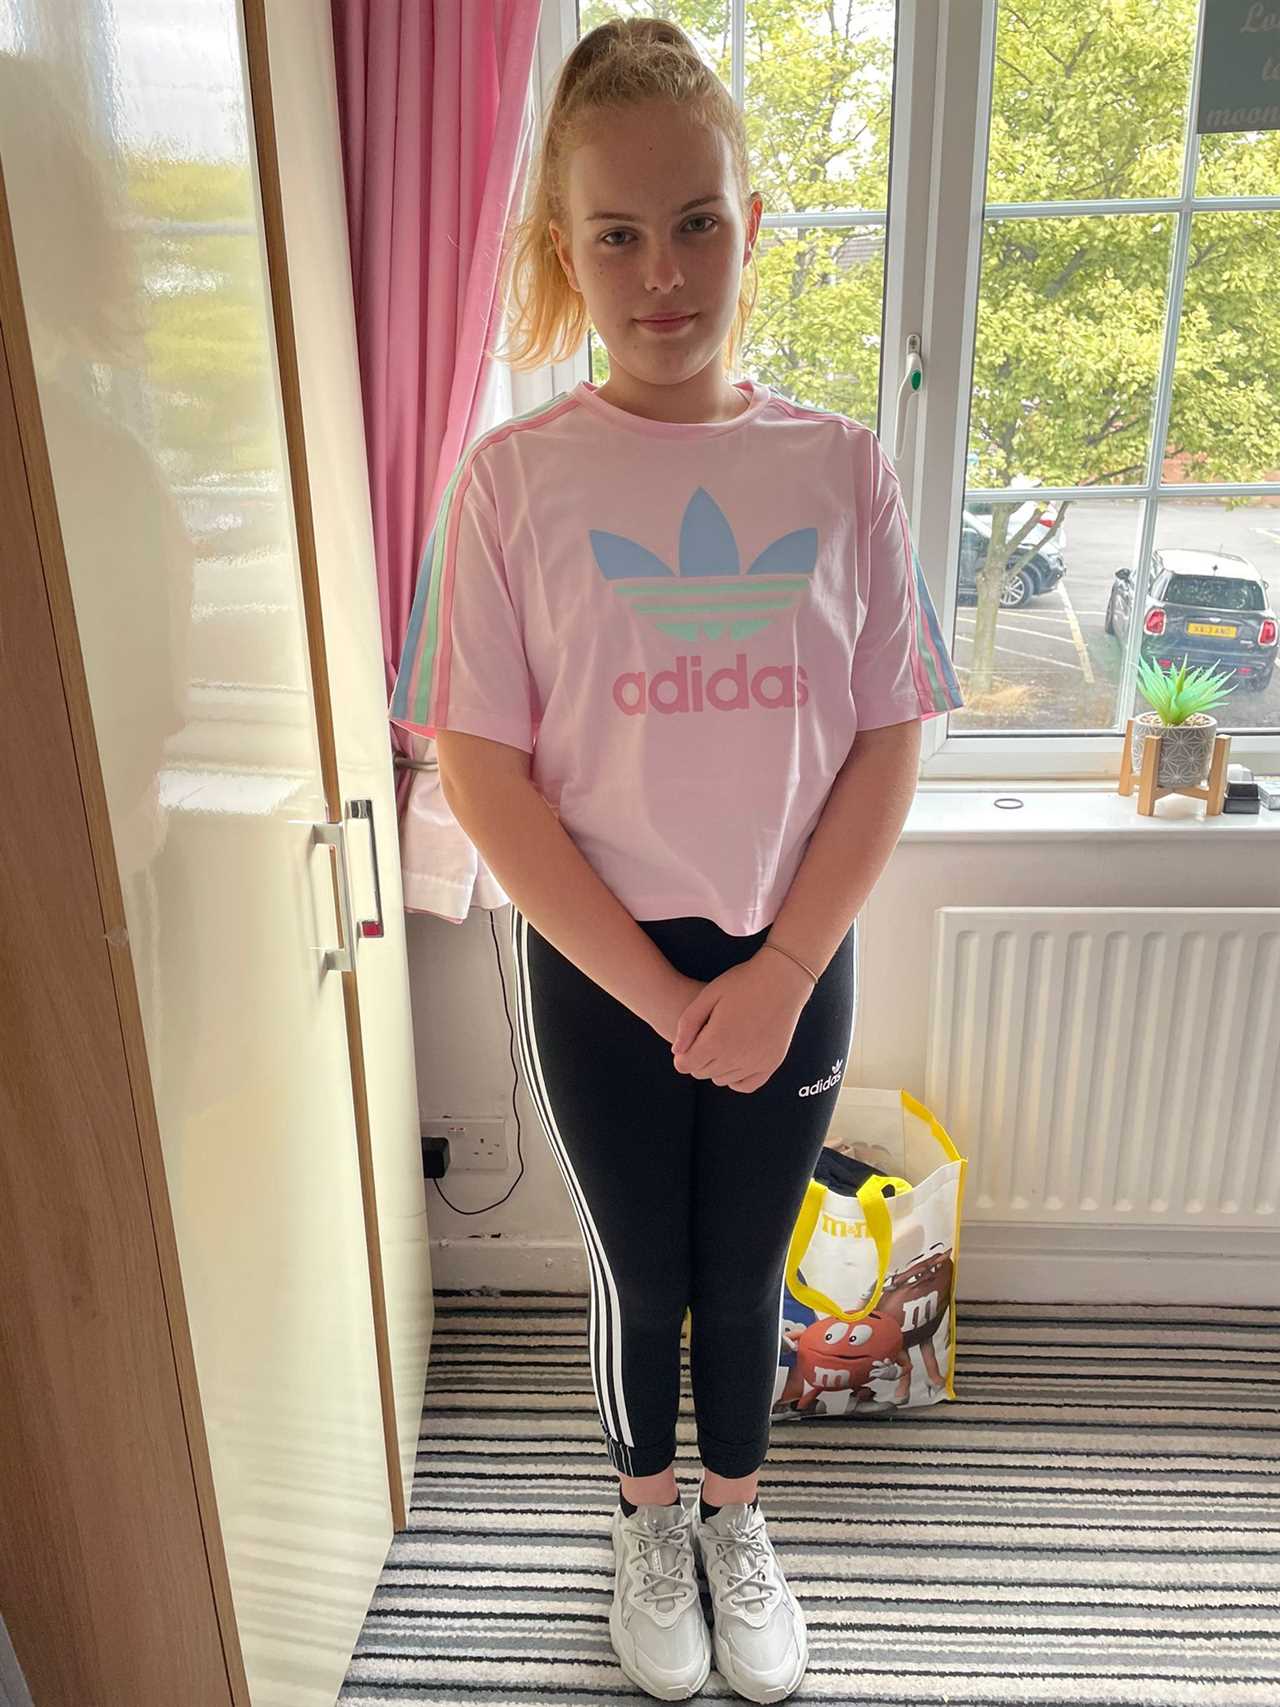 Schoolgirl, 11, left fighting for life after contracting rare Covid condition that turned her yellow